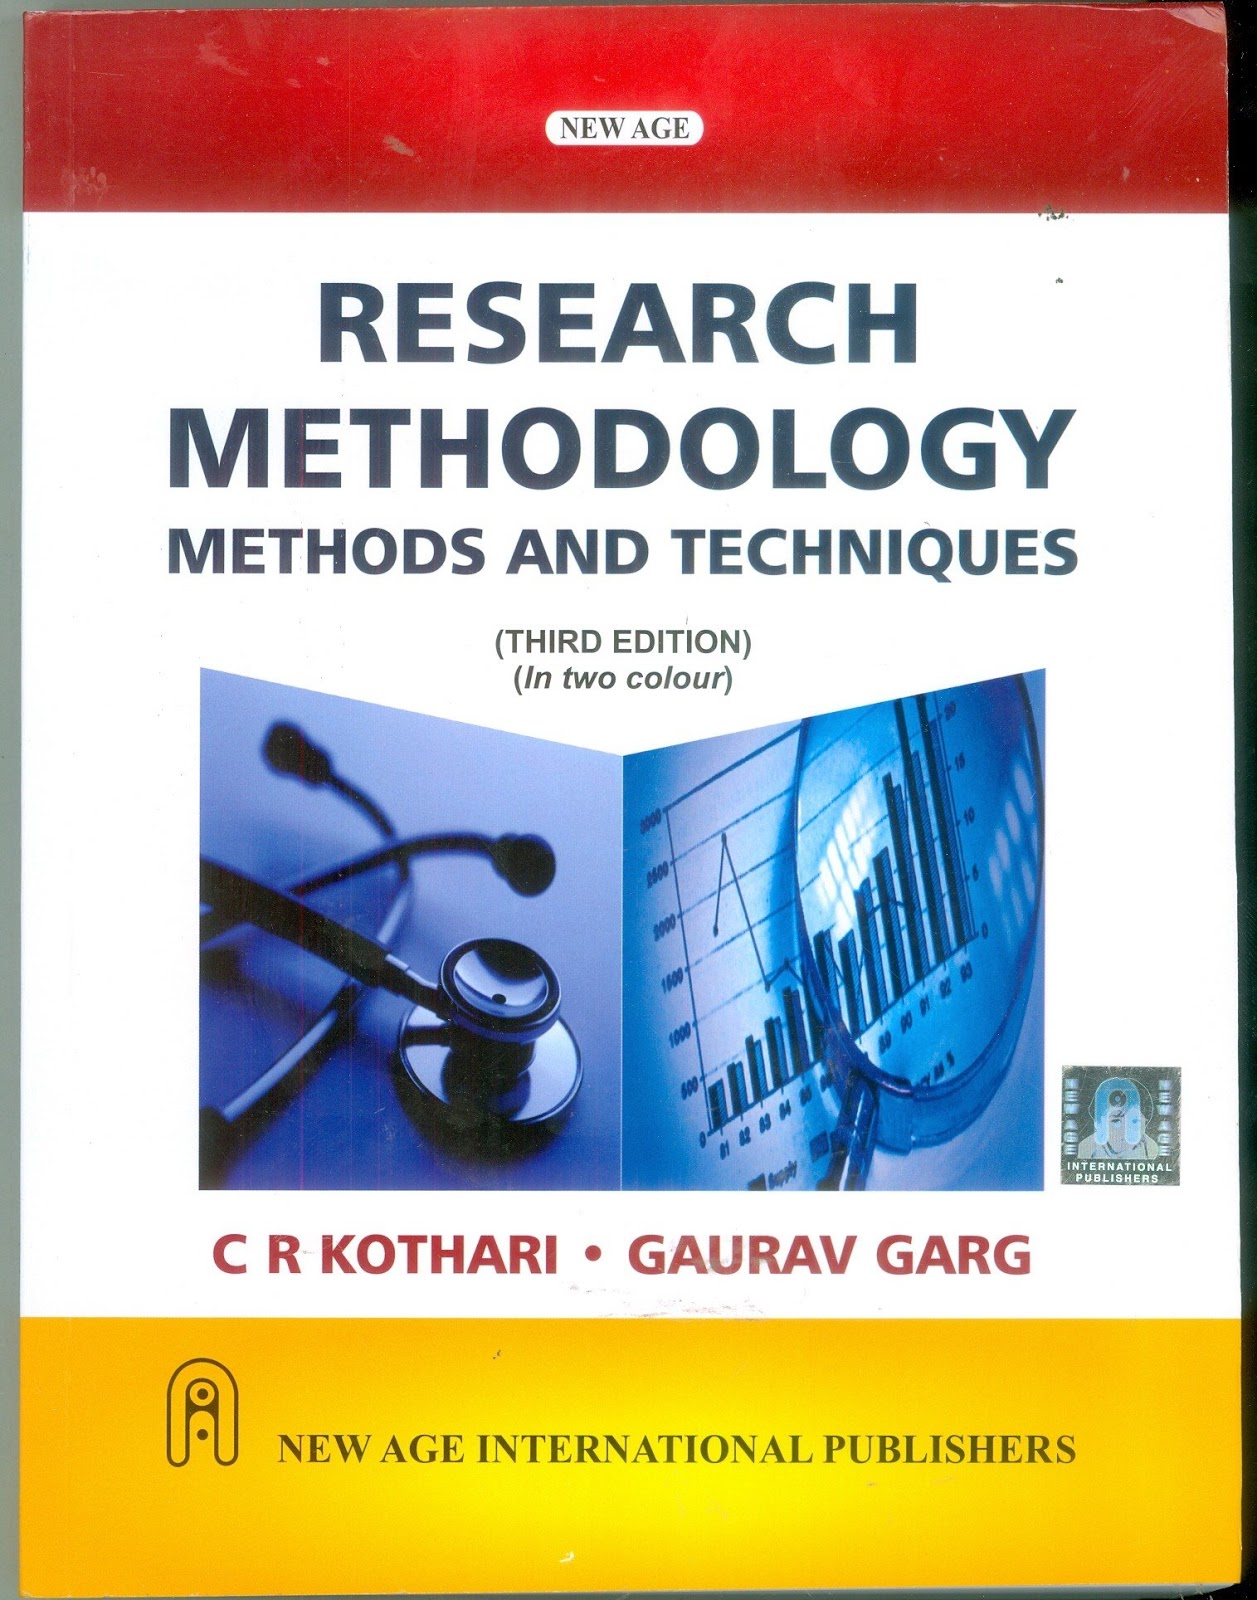 research methodology books reference